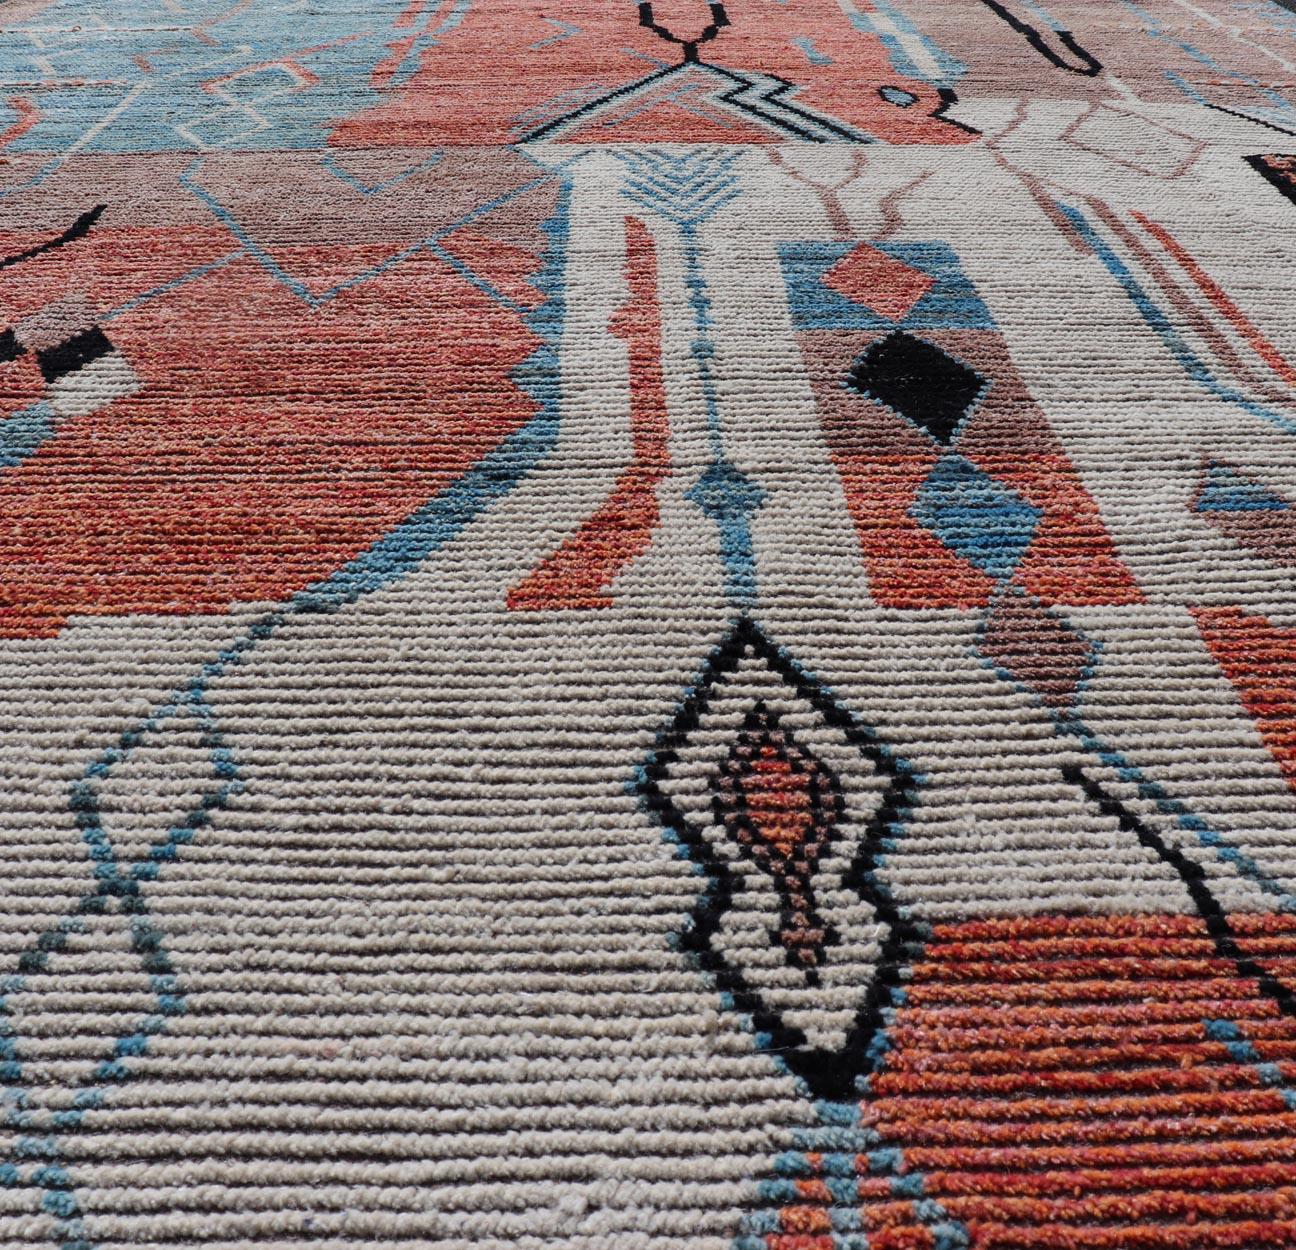 Modern Moroccan Rug With Abstract Design With Copper, Lt. Blue, and Ivory. Keivan Woven Arts; rug MSE-12863, country of origin / type: Afghanistan / Modern Casual, circa early-21th century.
Measures: 8'3 x 11'0 
Multicolor Moroccan Modern Rug has